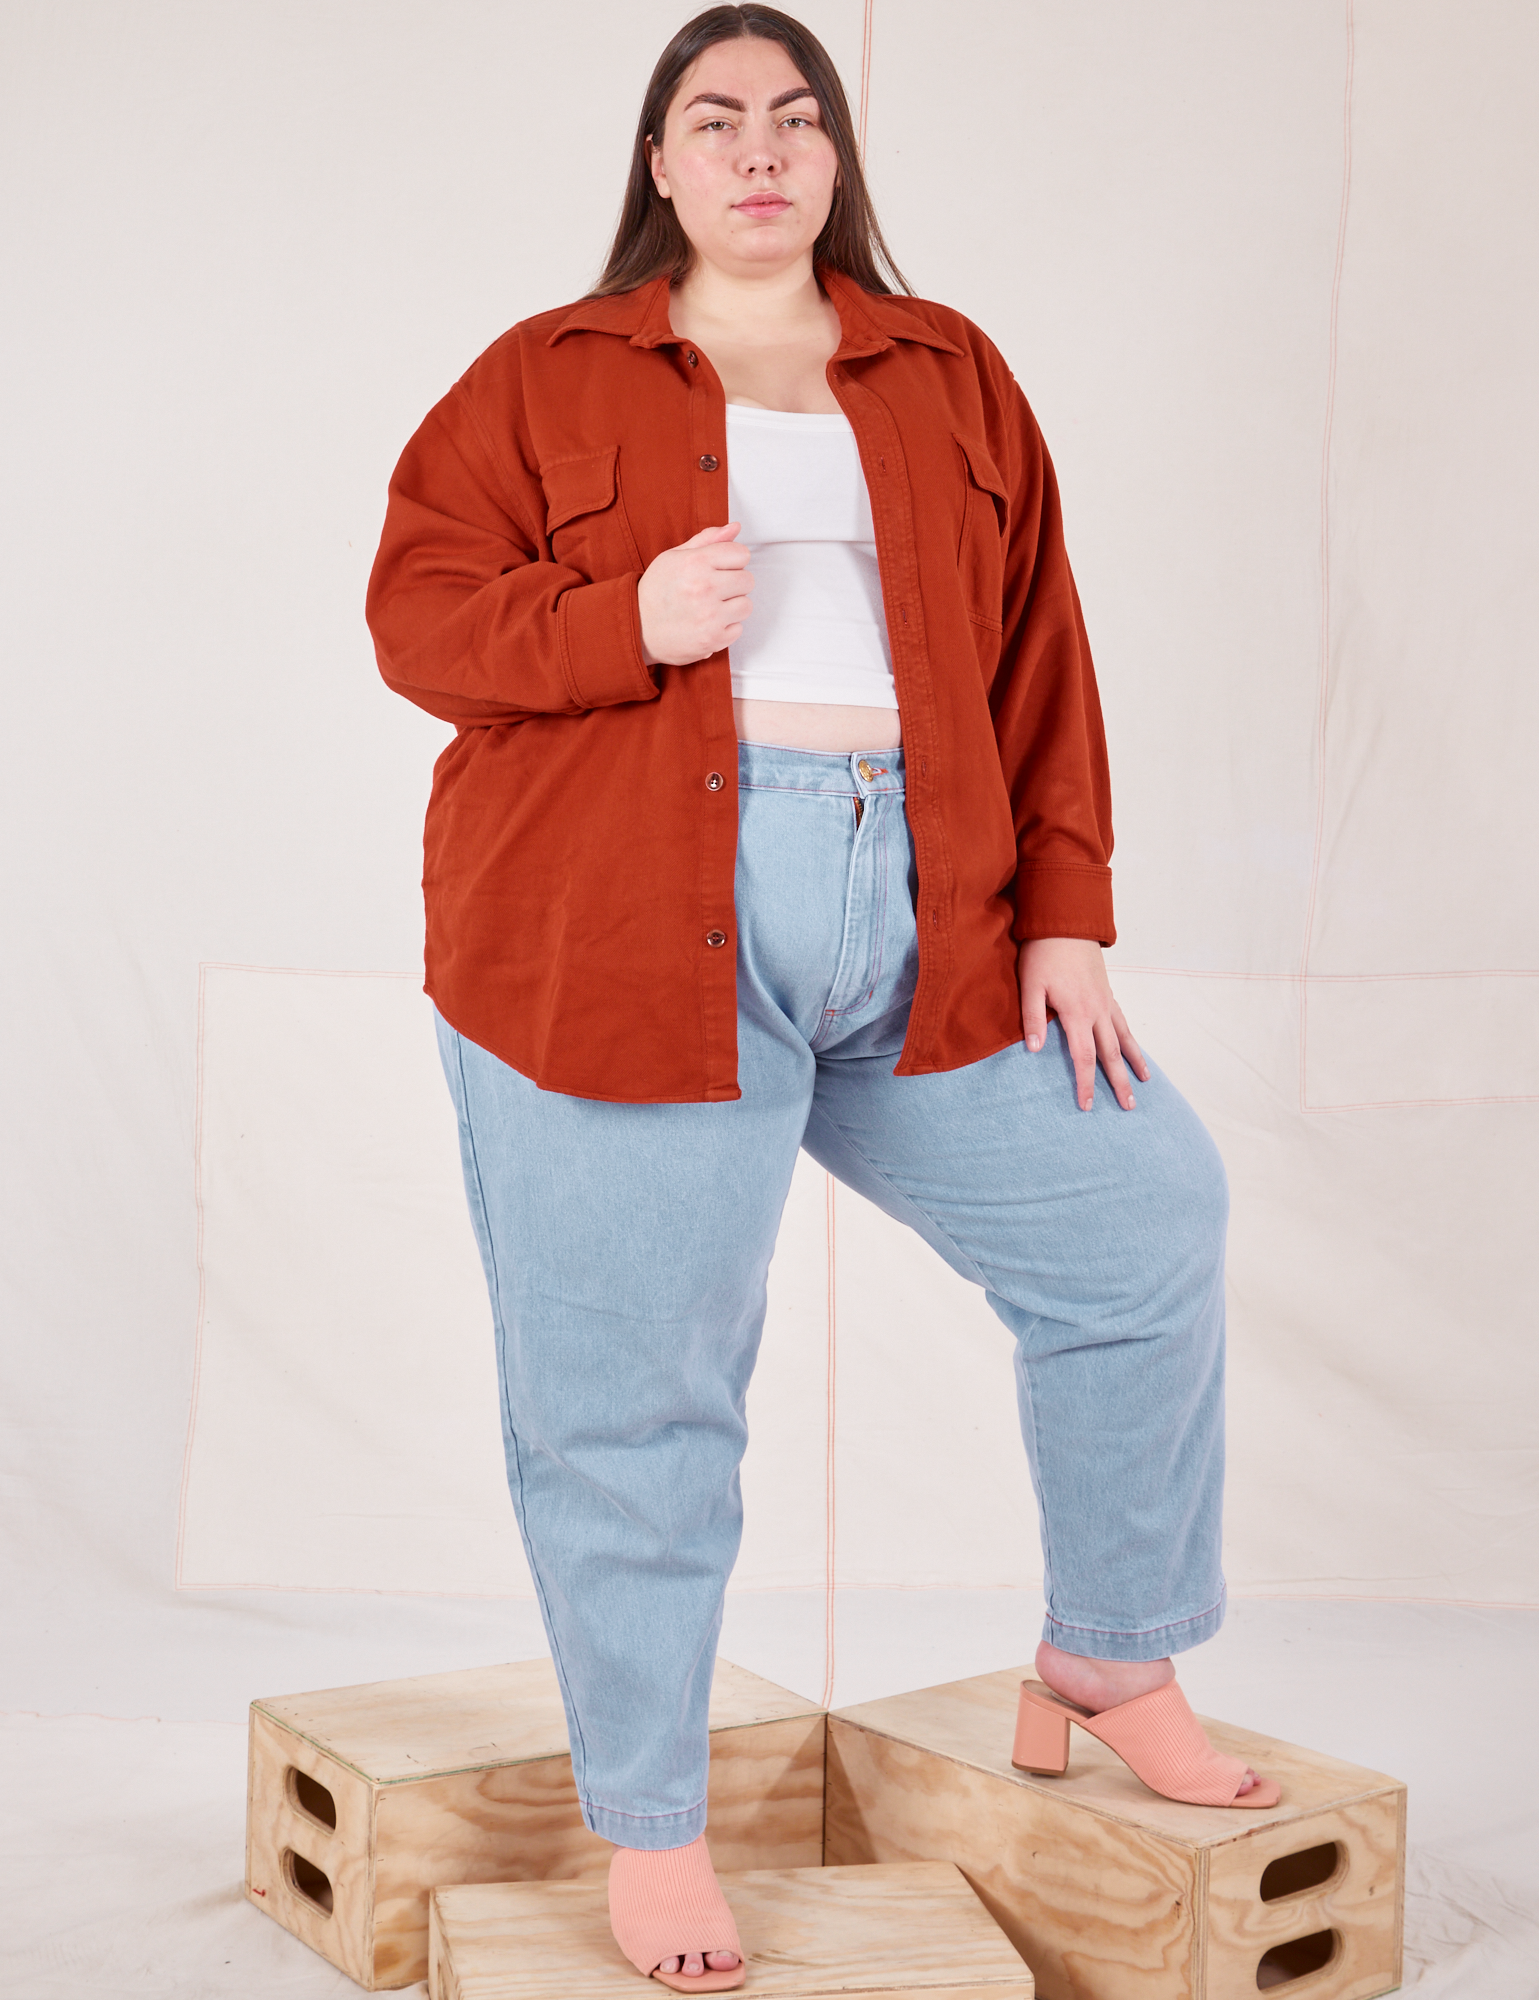 Marielena is wearing Flannel Overshirt in Paprika and light wash Trouser Jeans